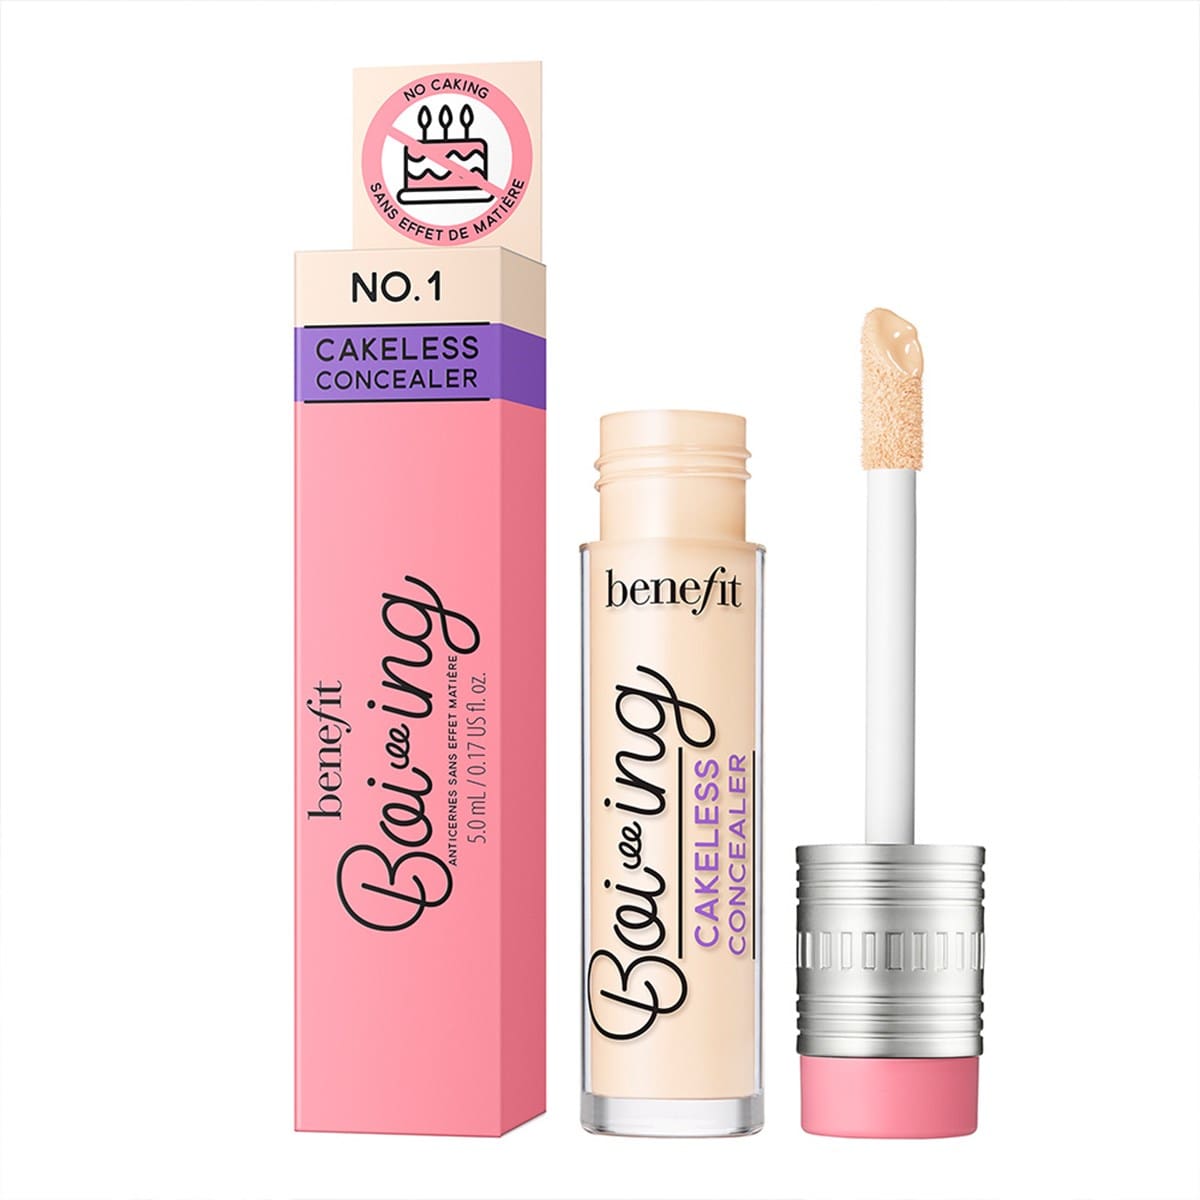 Boi-ing Cakeless Concealer Full coverage liquid concealer by Benefit